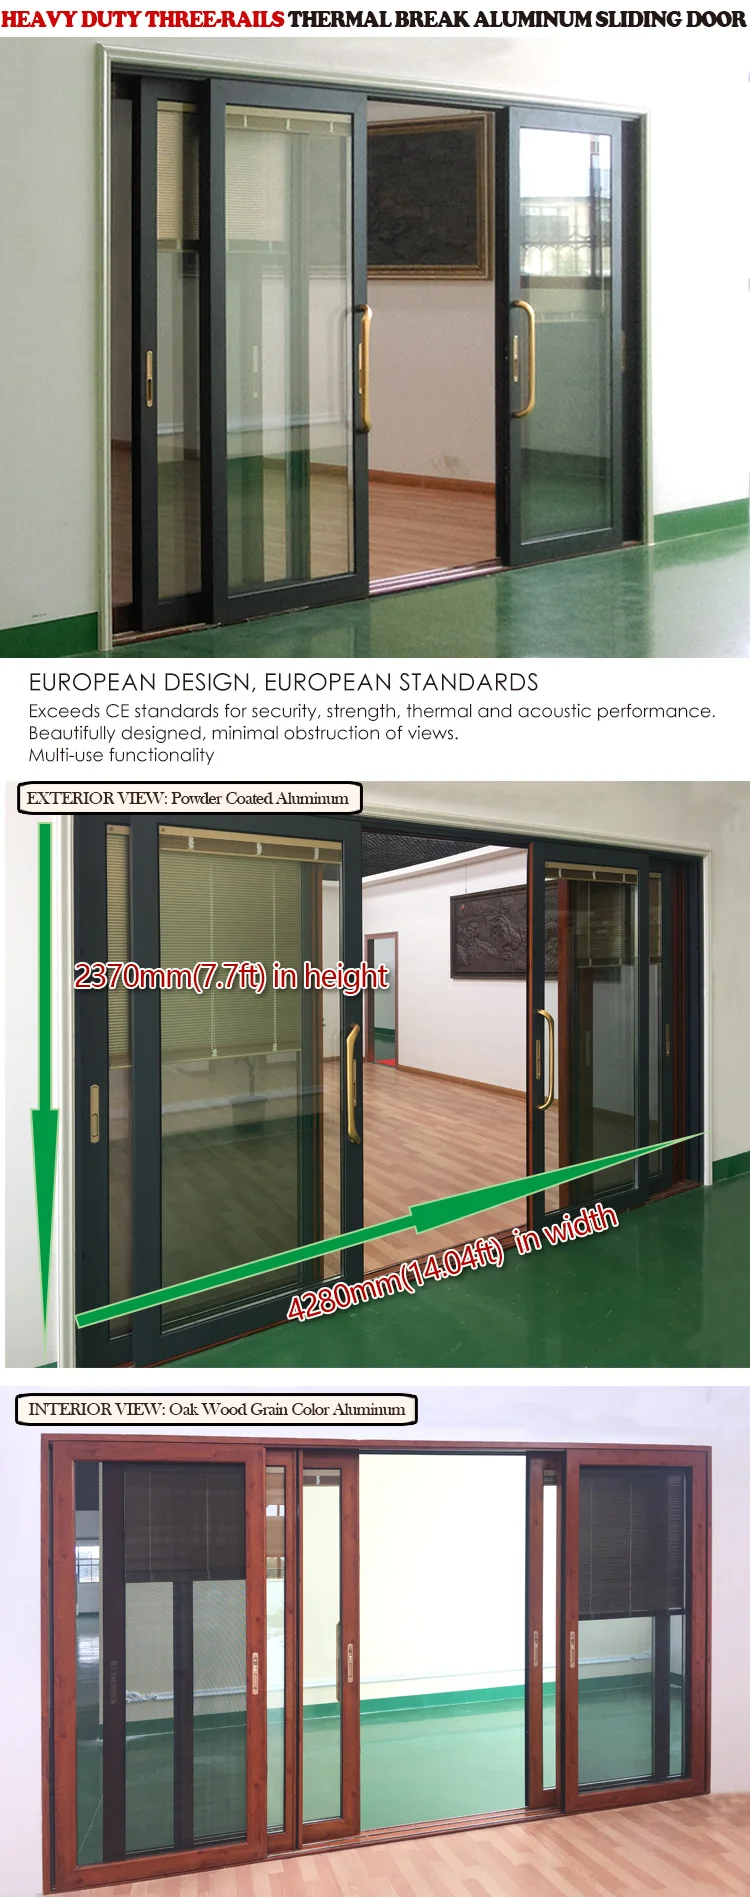 New hot selling products triple track sliding patio doors door hardware